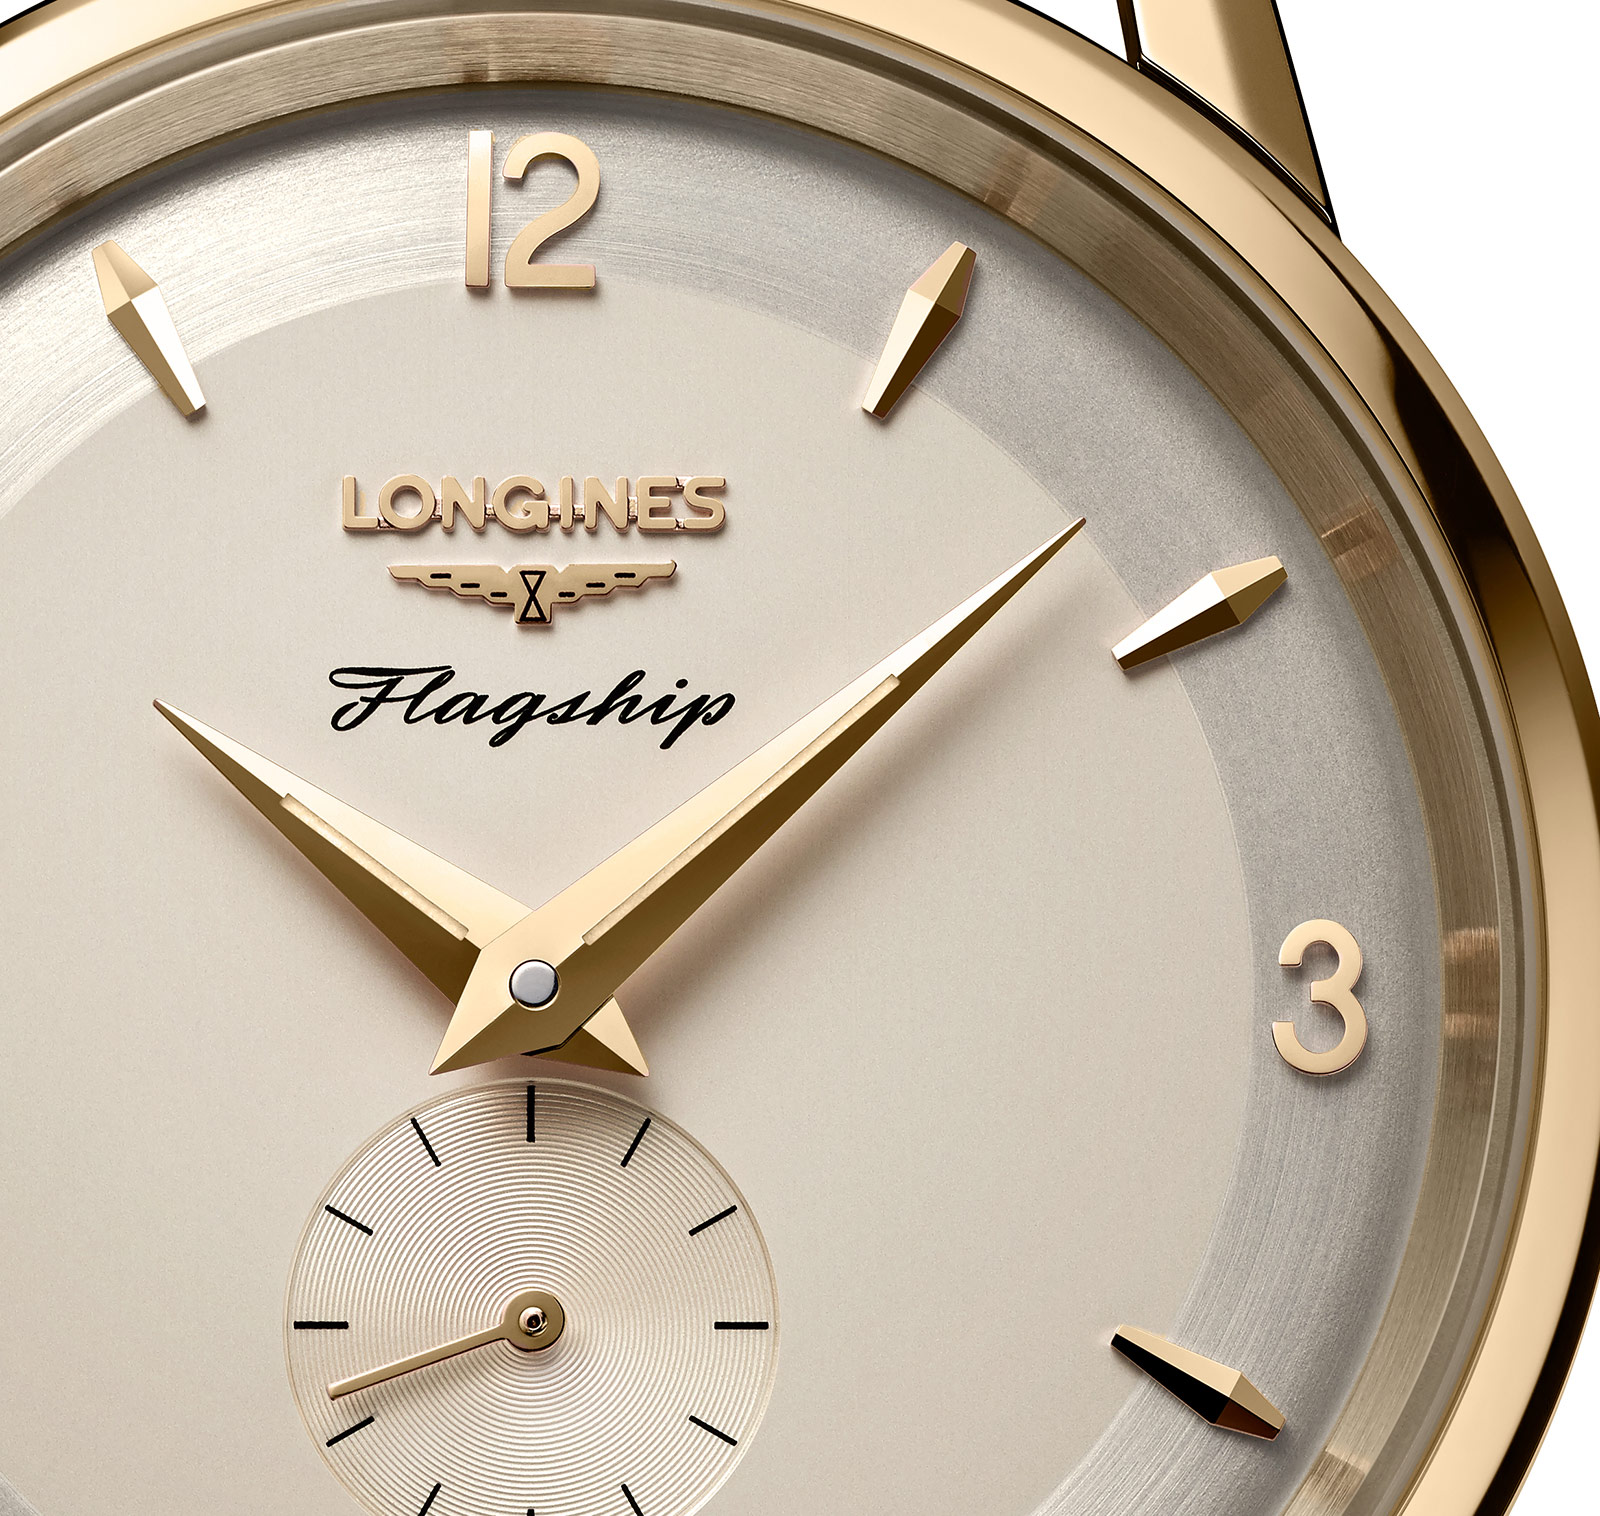 Longines Flagship Heritage 60th Anniversary yellow gold